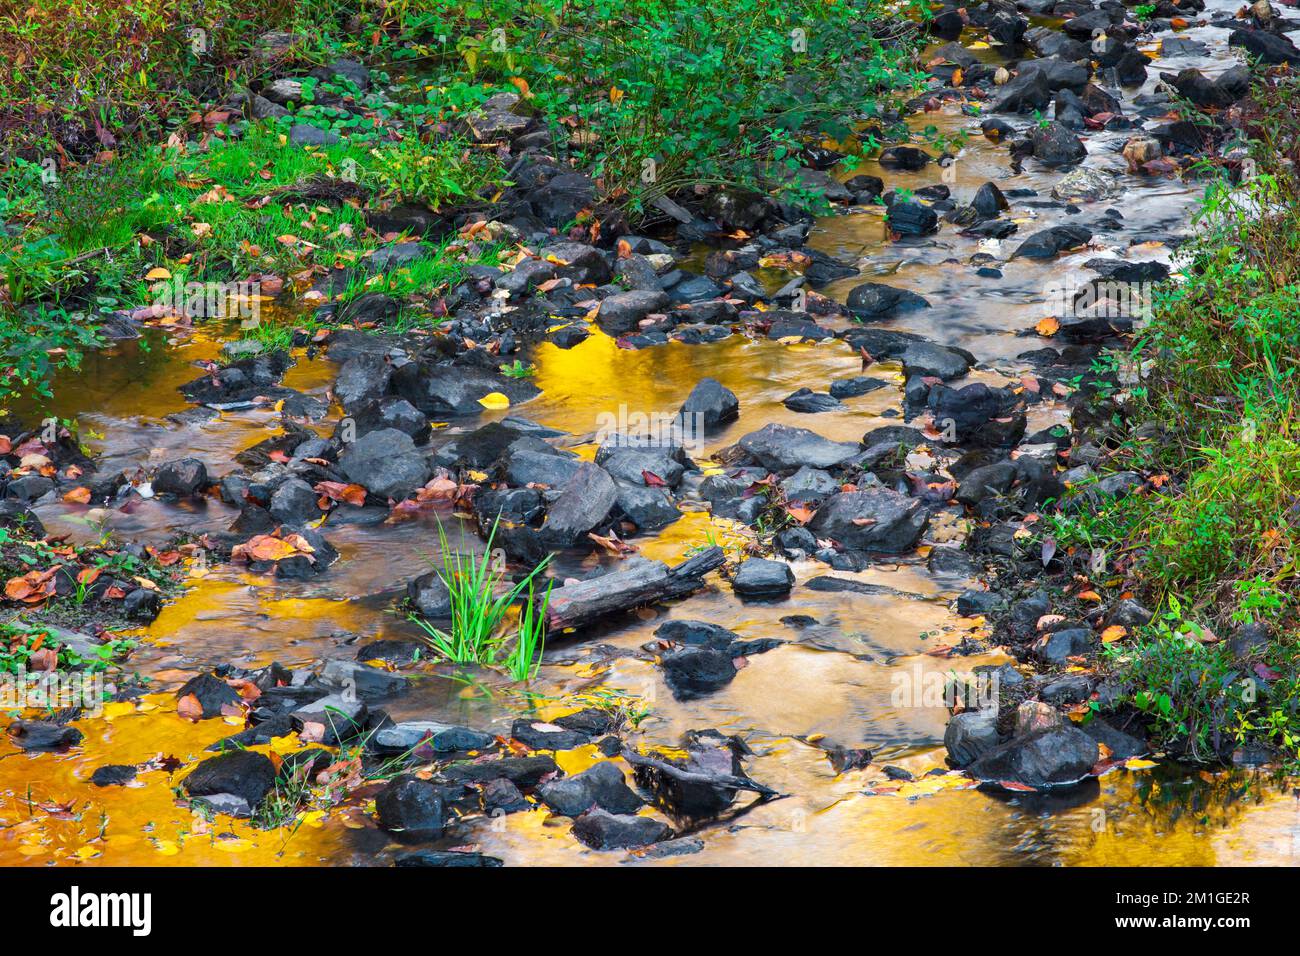 Autumn reflections in Big Egypt Creek in Delaware Water Gao National Recreation Area, Pennsylvania Stock Photo